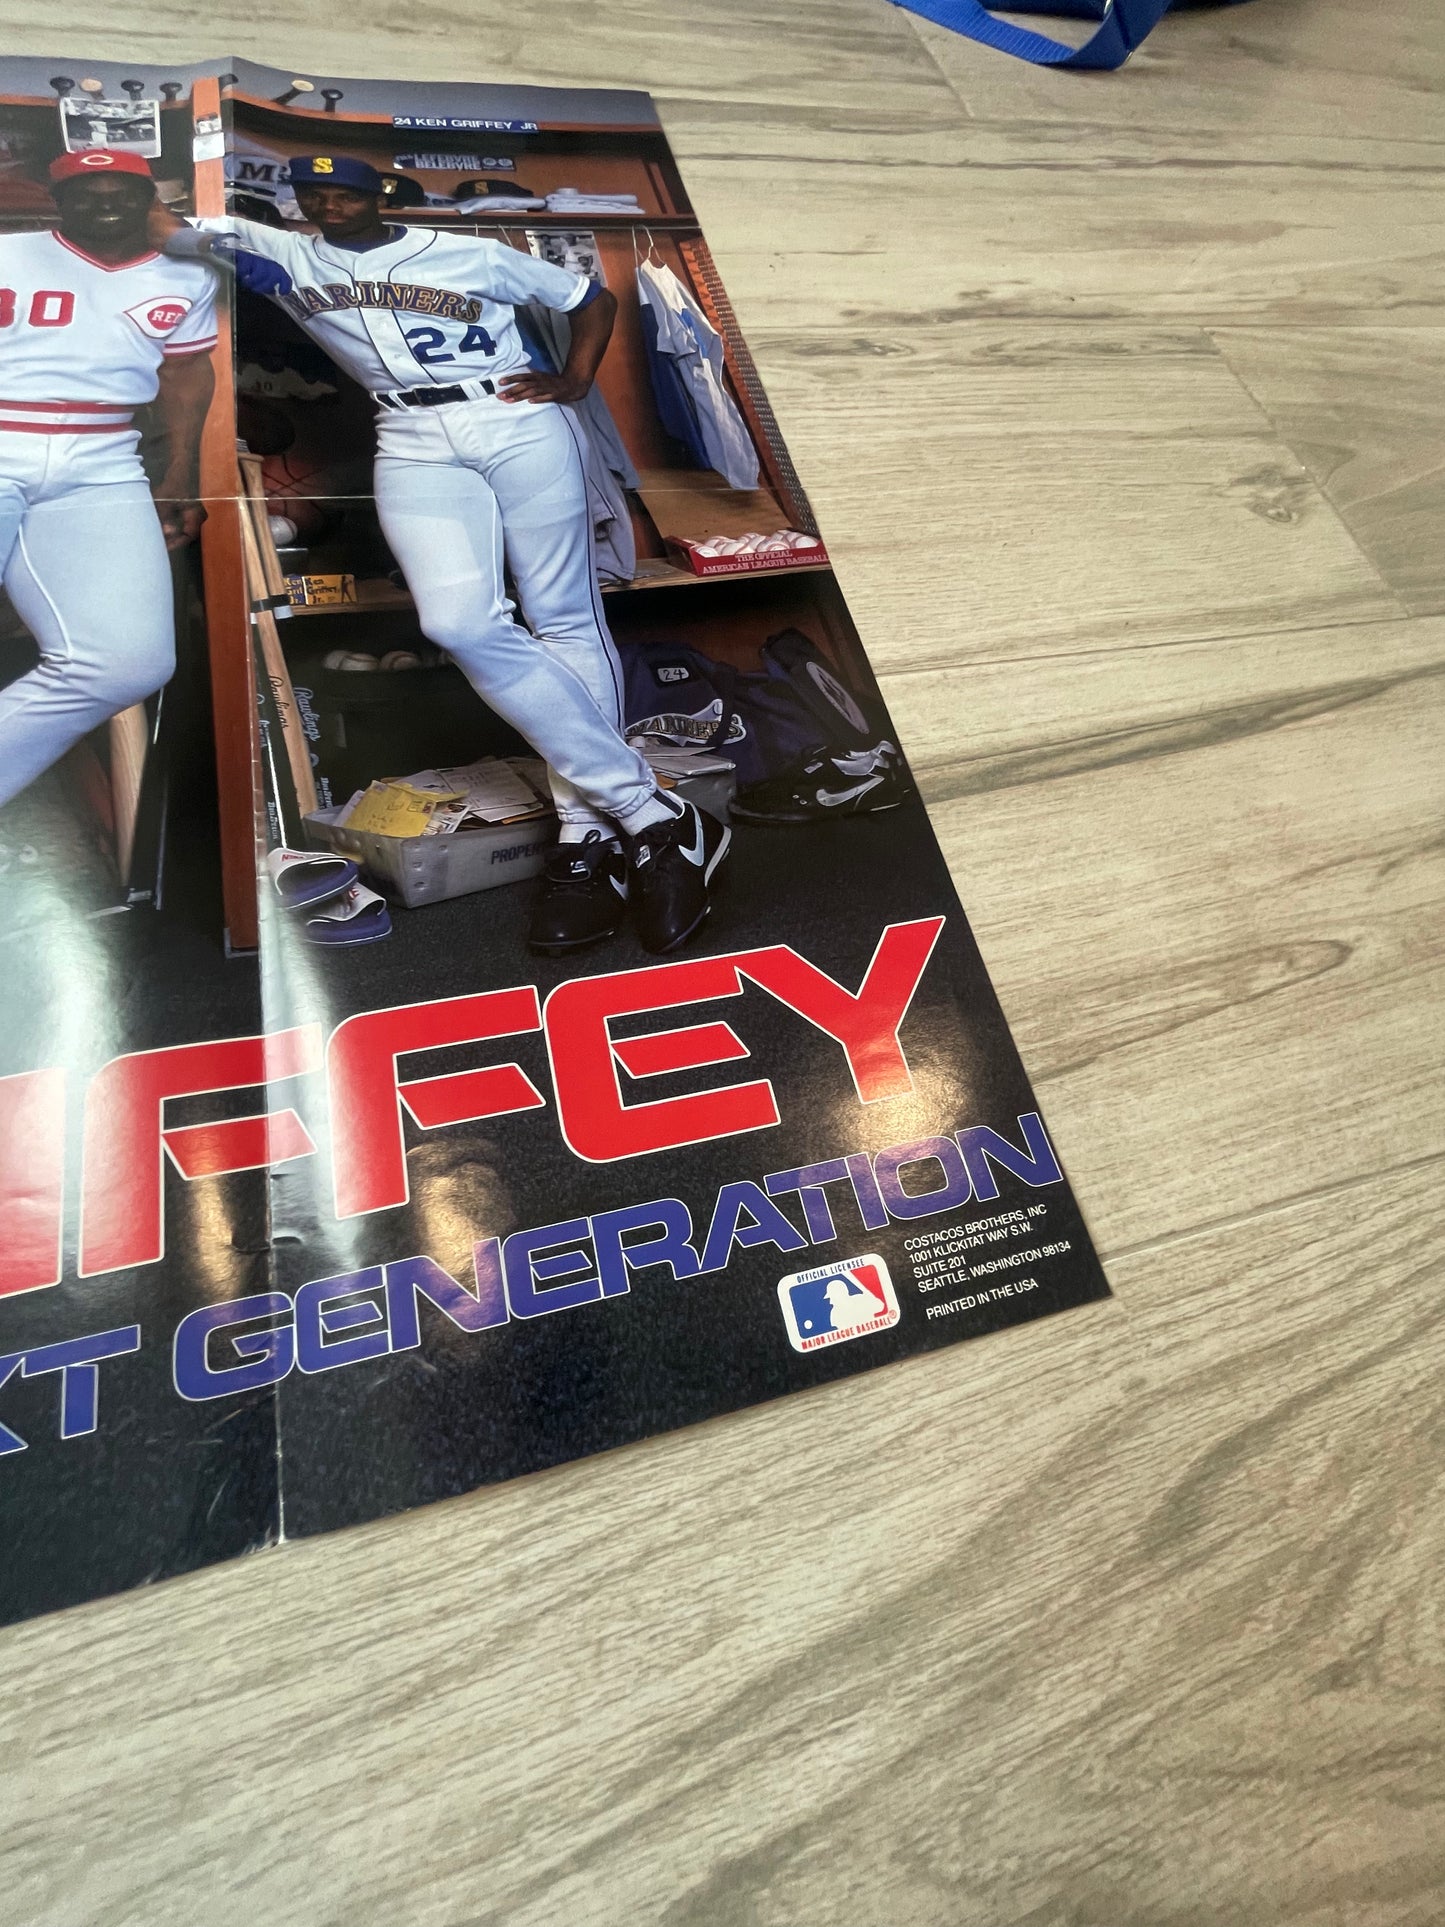 Griffey the Next Generation Poster